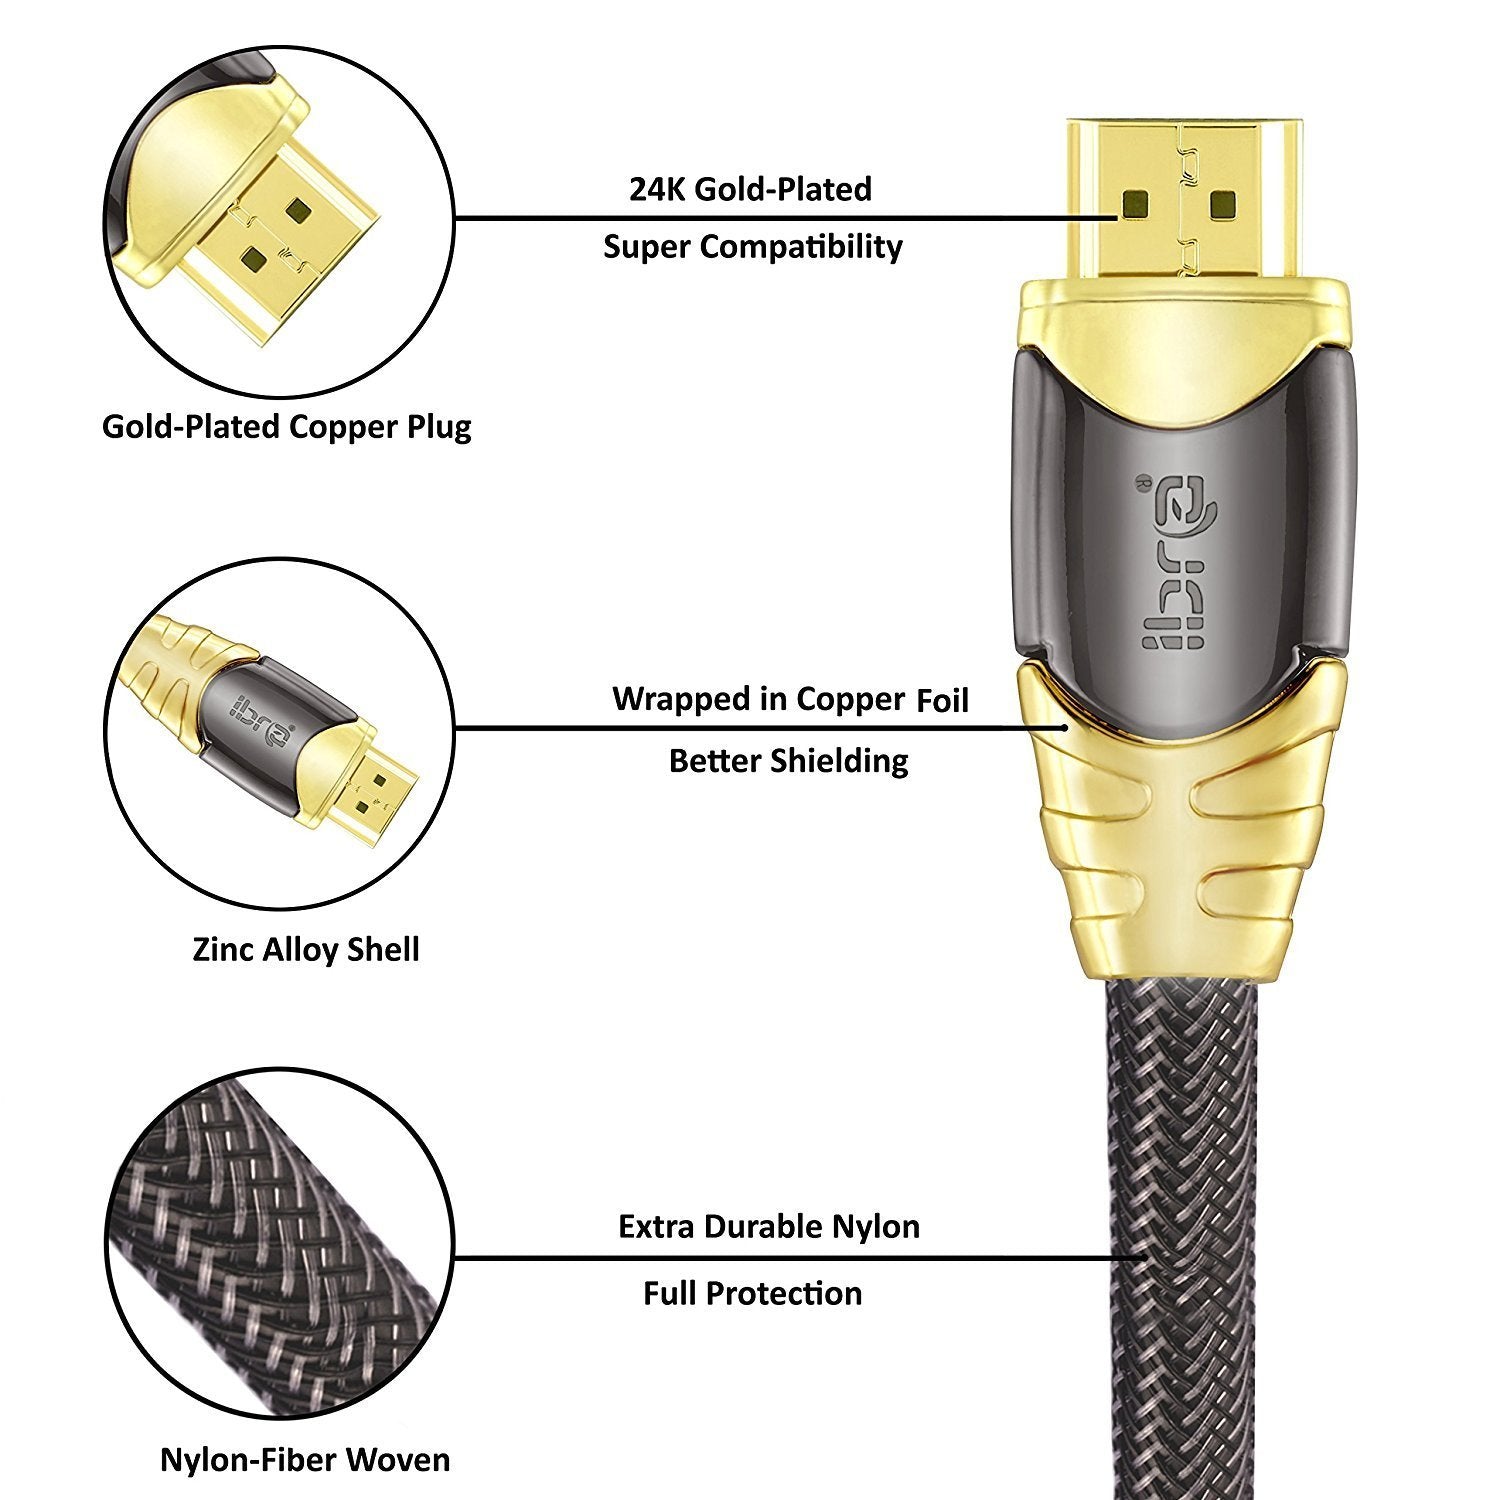 HDMI Cable 8M - HDMI 2.0 (4K@60Hz) Ready - 28AWG Braided Cord - 18Gbps -Gold Plated Connectors - Ethernet, Audio Return - Video 4K 2160p HD 1080p 3D Xbox PlayStation PS3 PS4 PC Apple TV – IBRA LUXURY